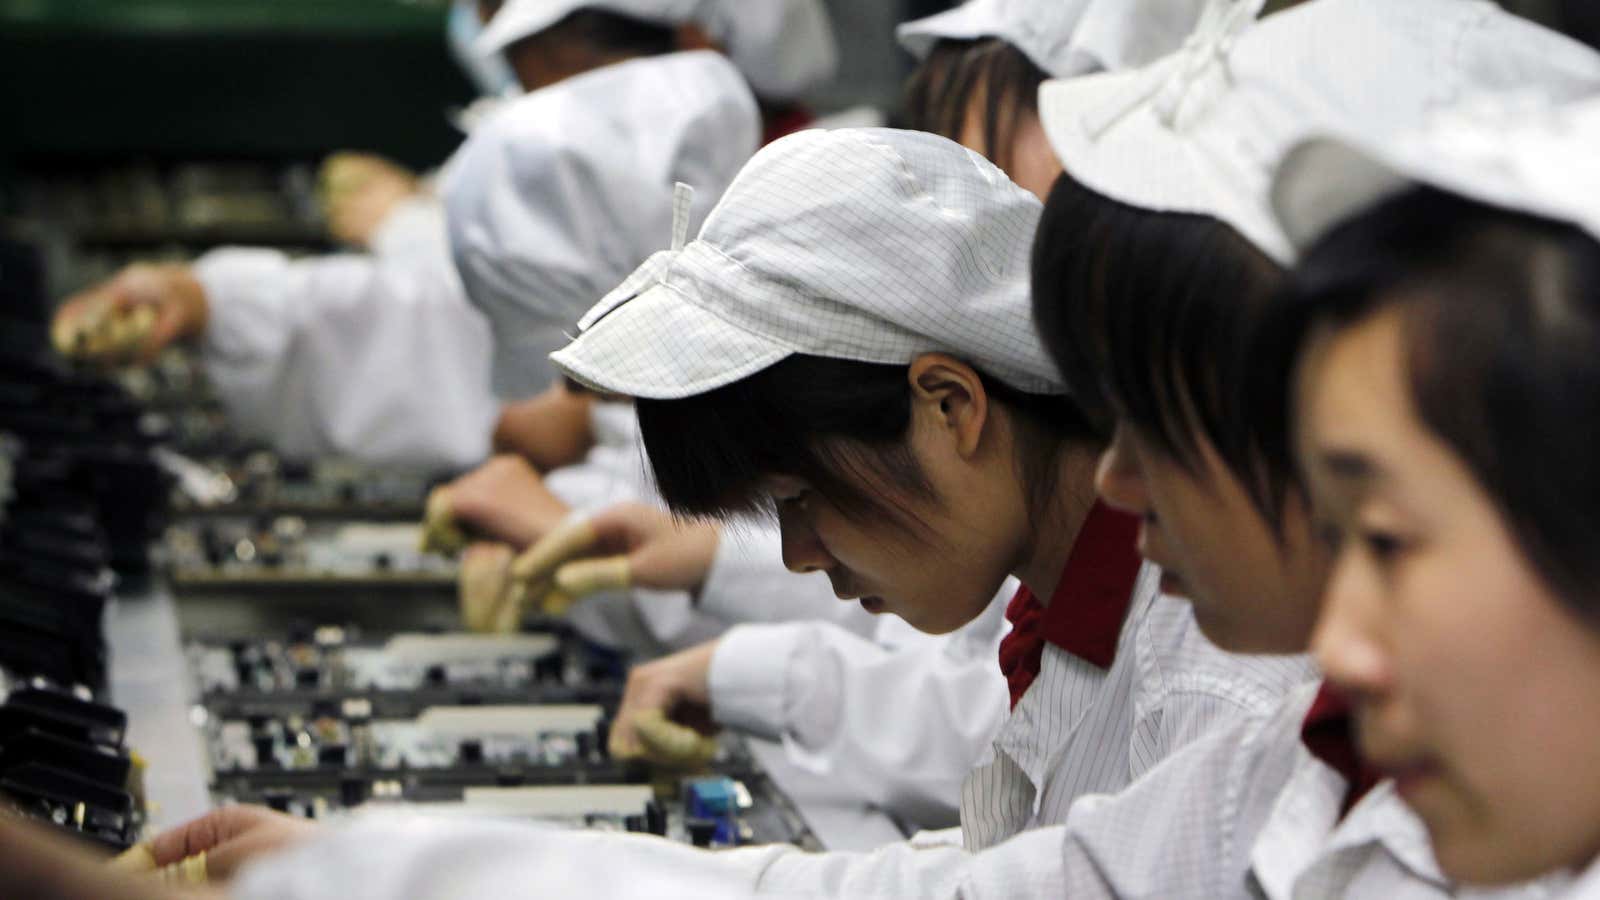 Most MNCs stop their labor audits here: at the “five-star” factory assembly stage.